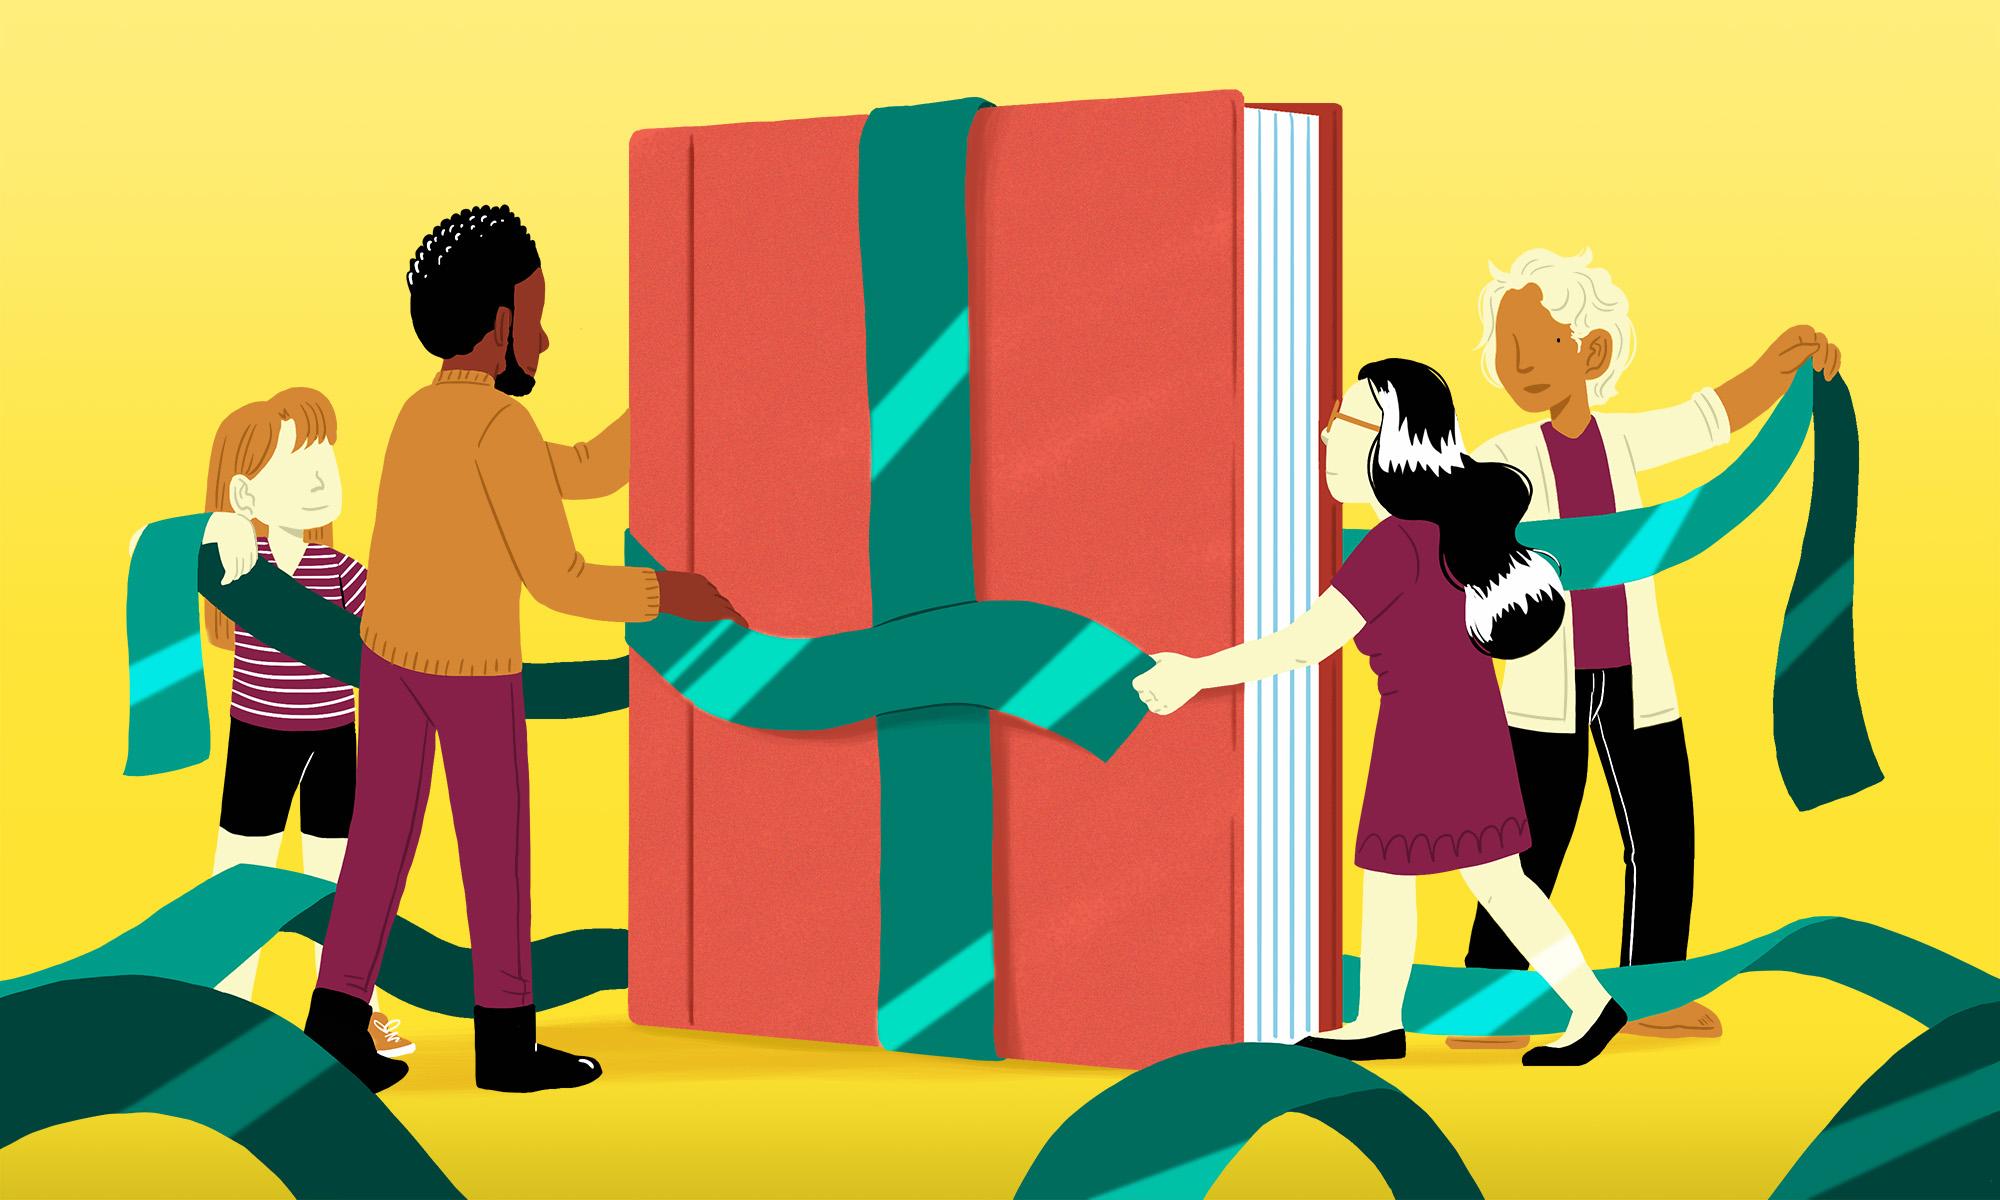 Your gift guide: Books for all kinds of readers, from TED